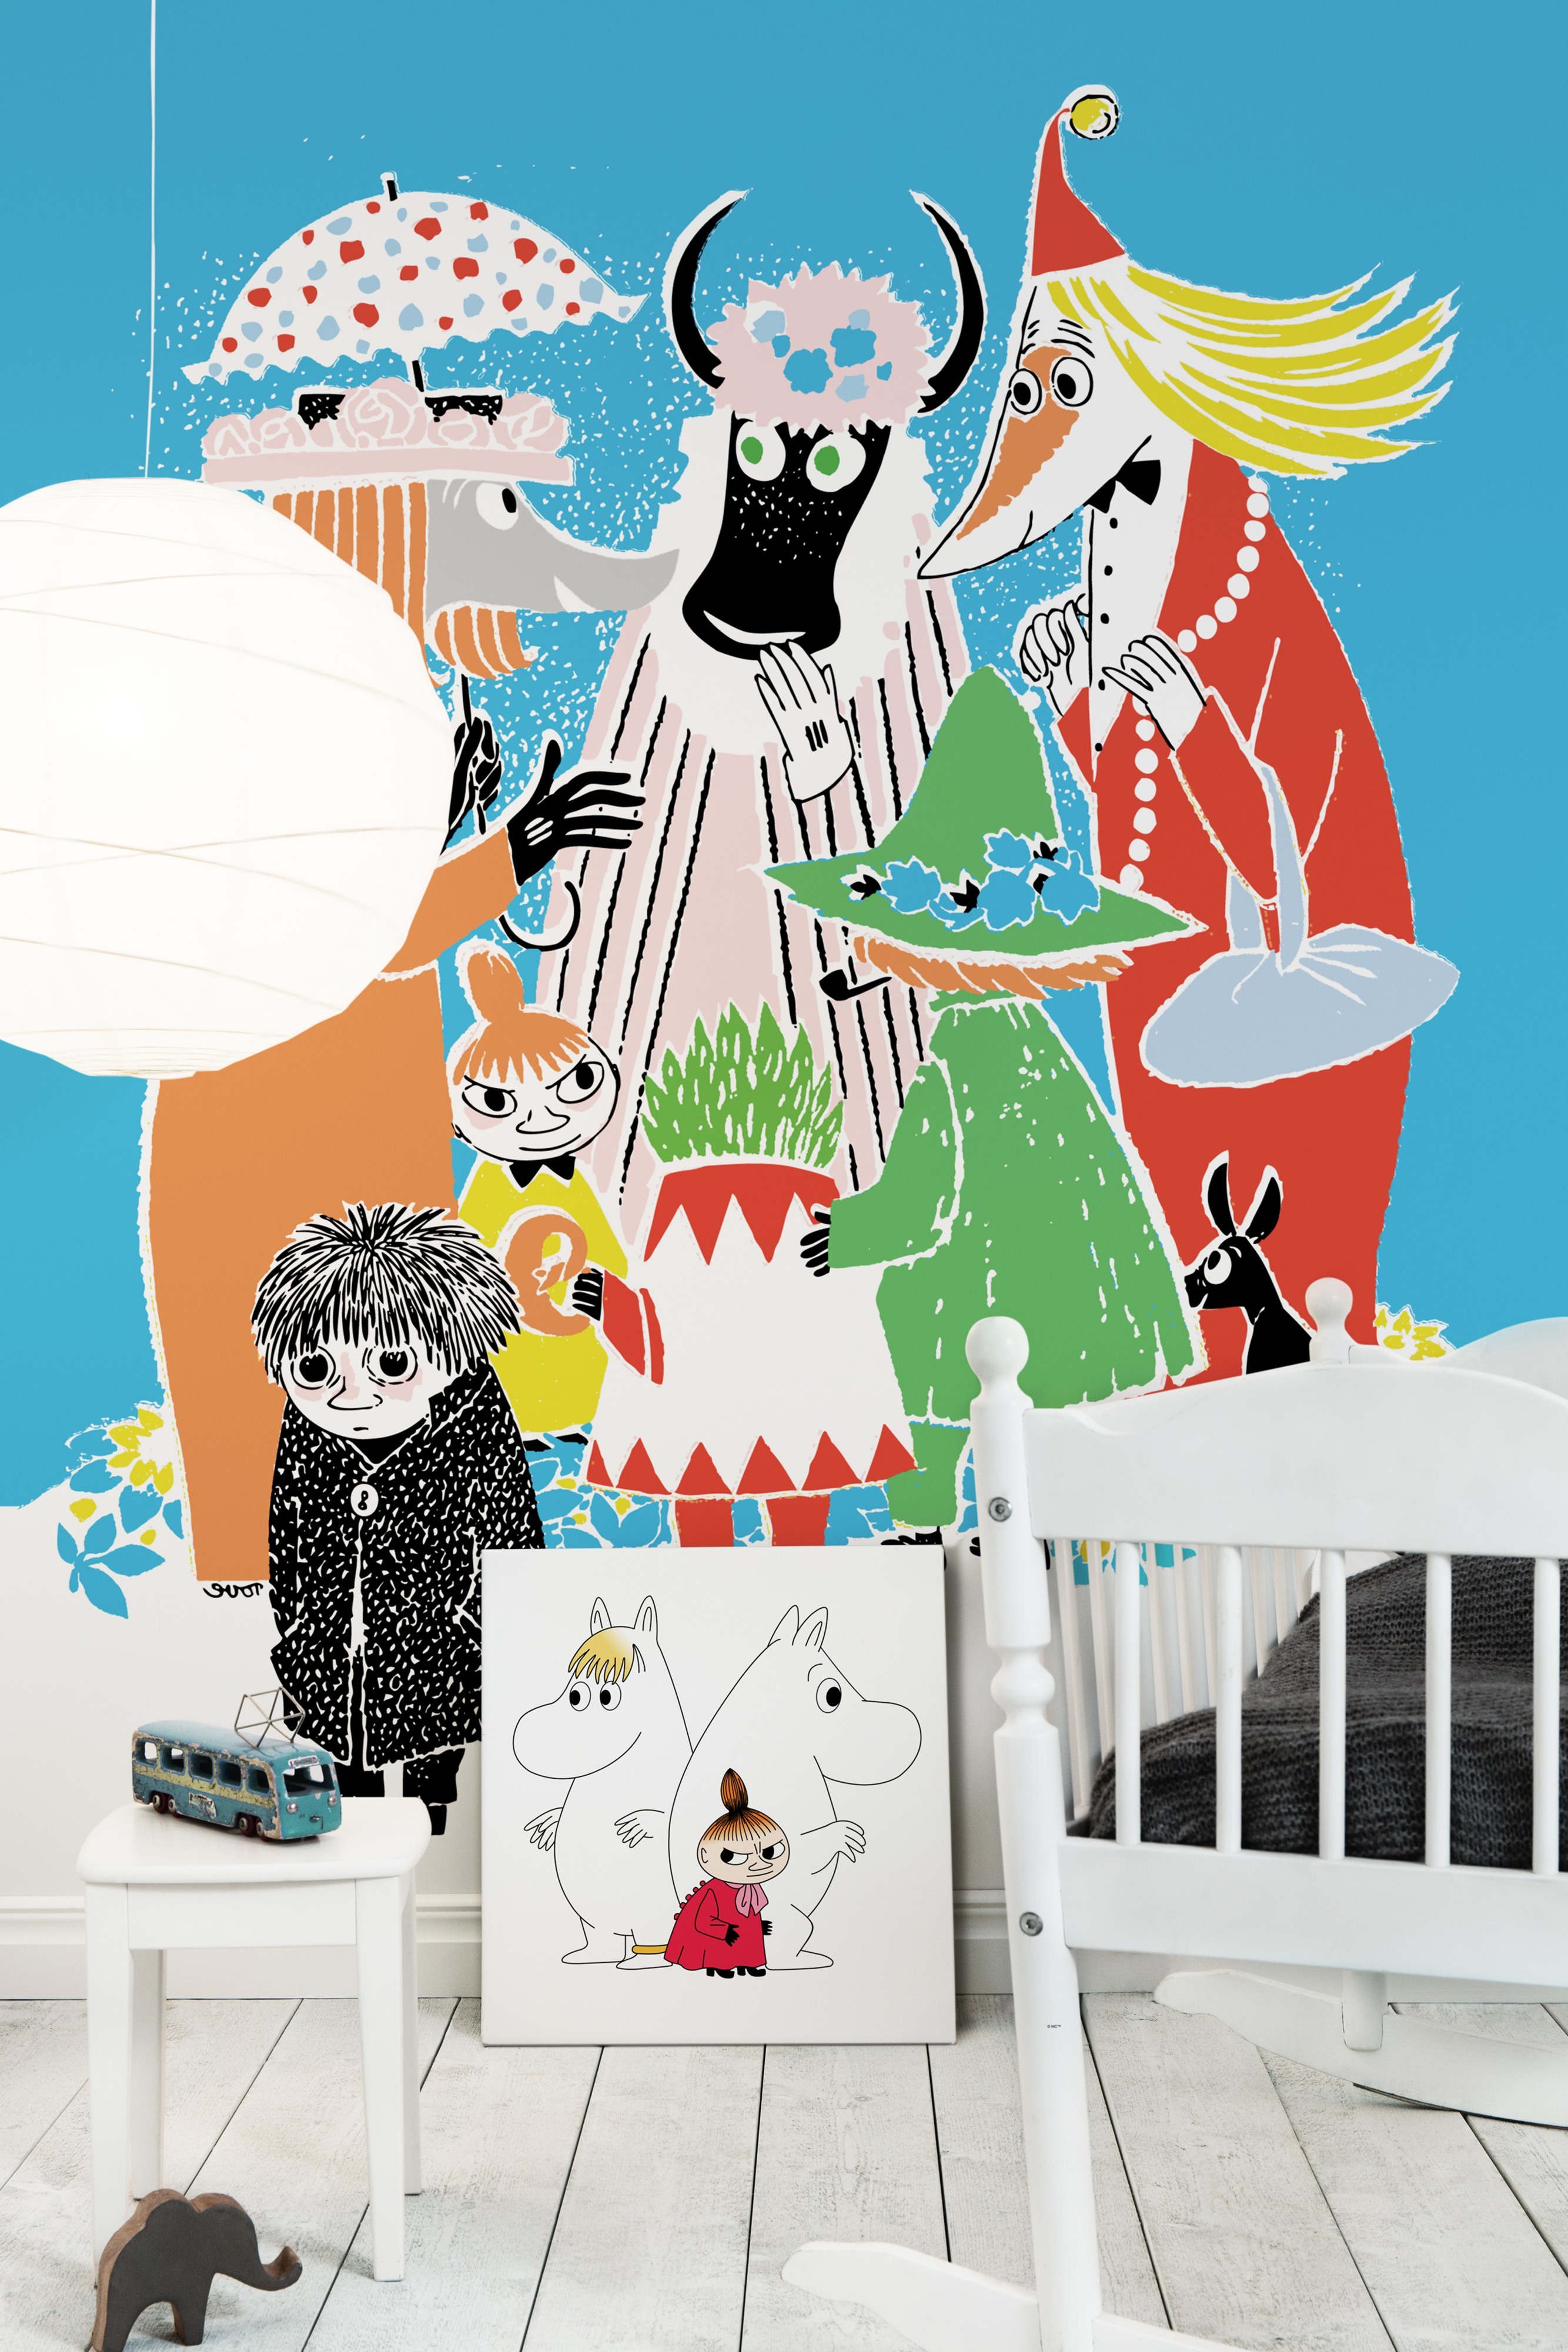 Wall mural "Moomin - Who will comfort Toffle?" and canvas print "Moomin, Snorkmaiden & Little My"